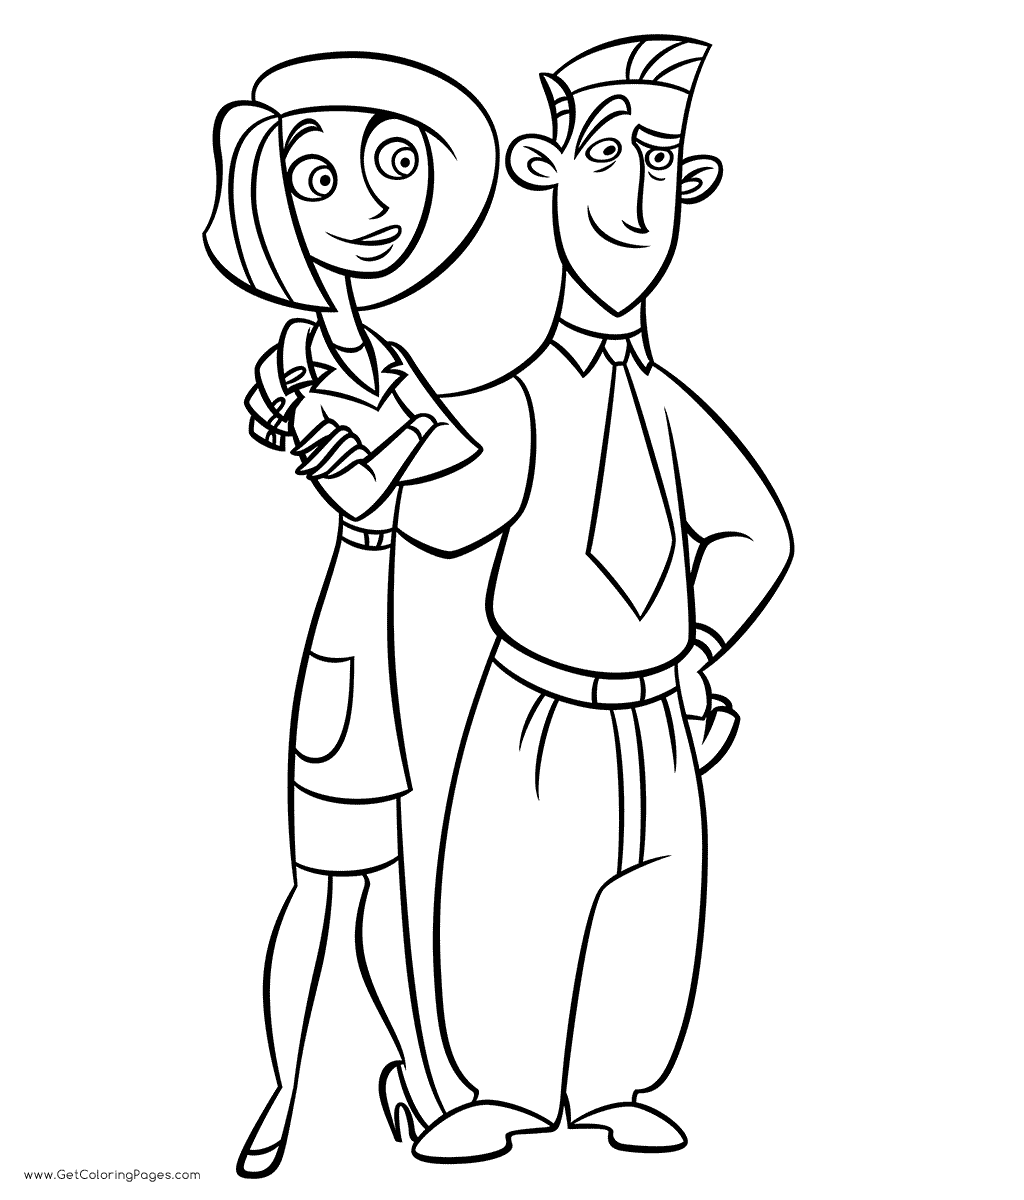 Dr. Ann and James Timothy Possible Coloring Page